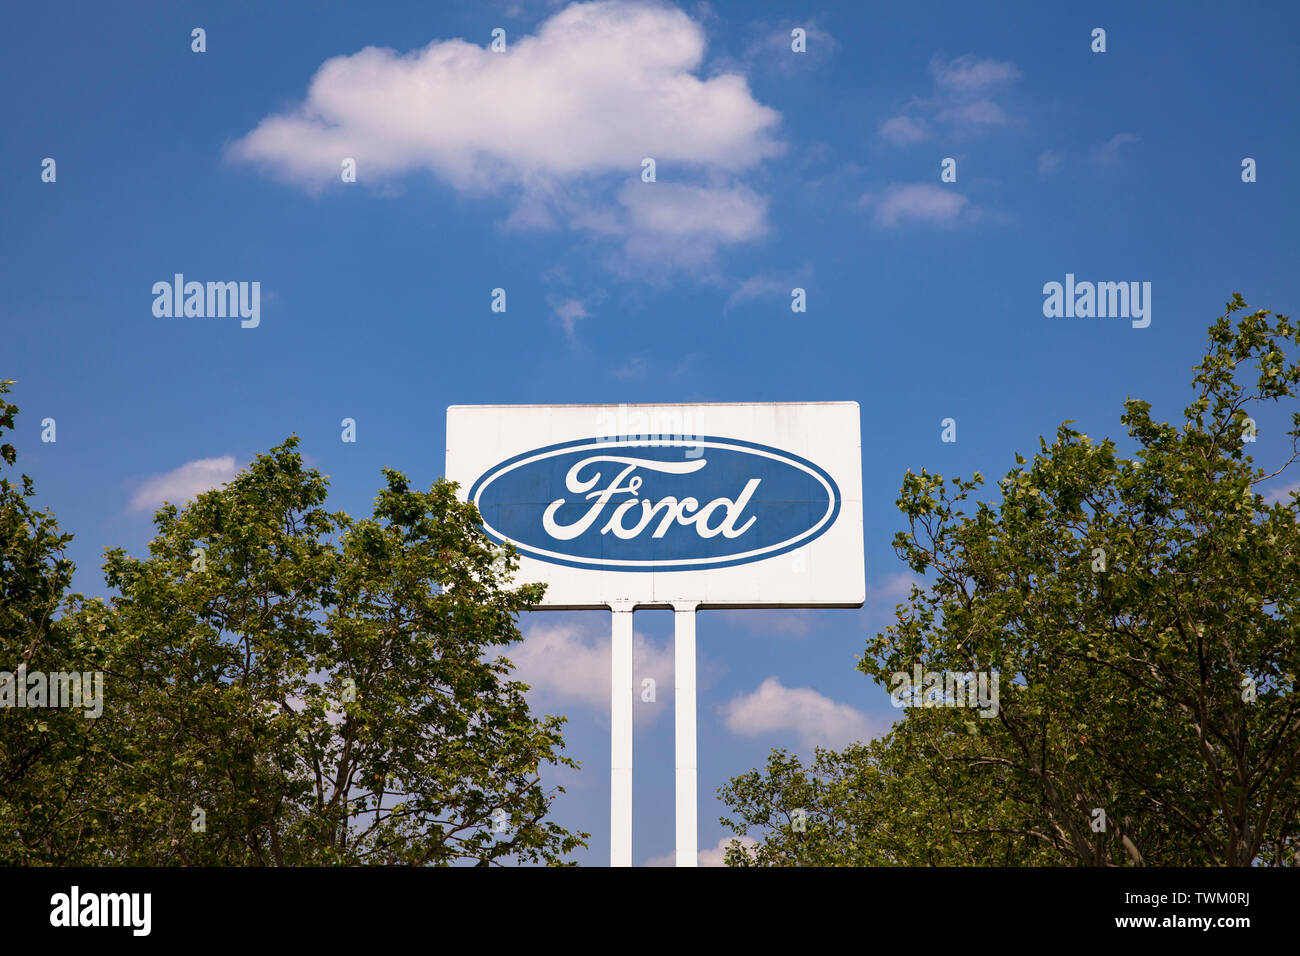 large advertising sign at the Ford automobile factory in the town district Niehl, Cologne, Germany.  grosses Werbeschild an den Ford-Werken in Niehl, Stock Photo